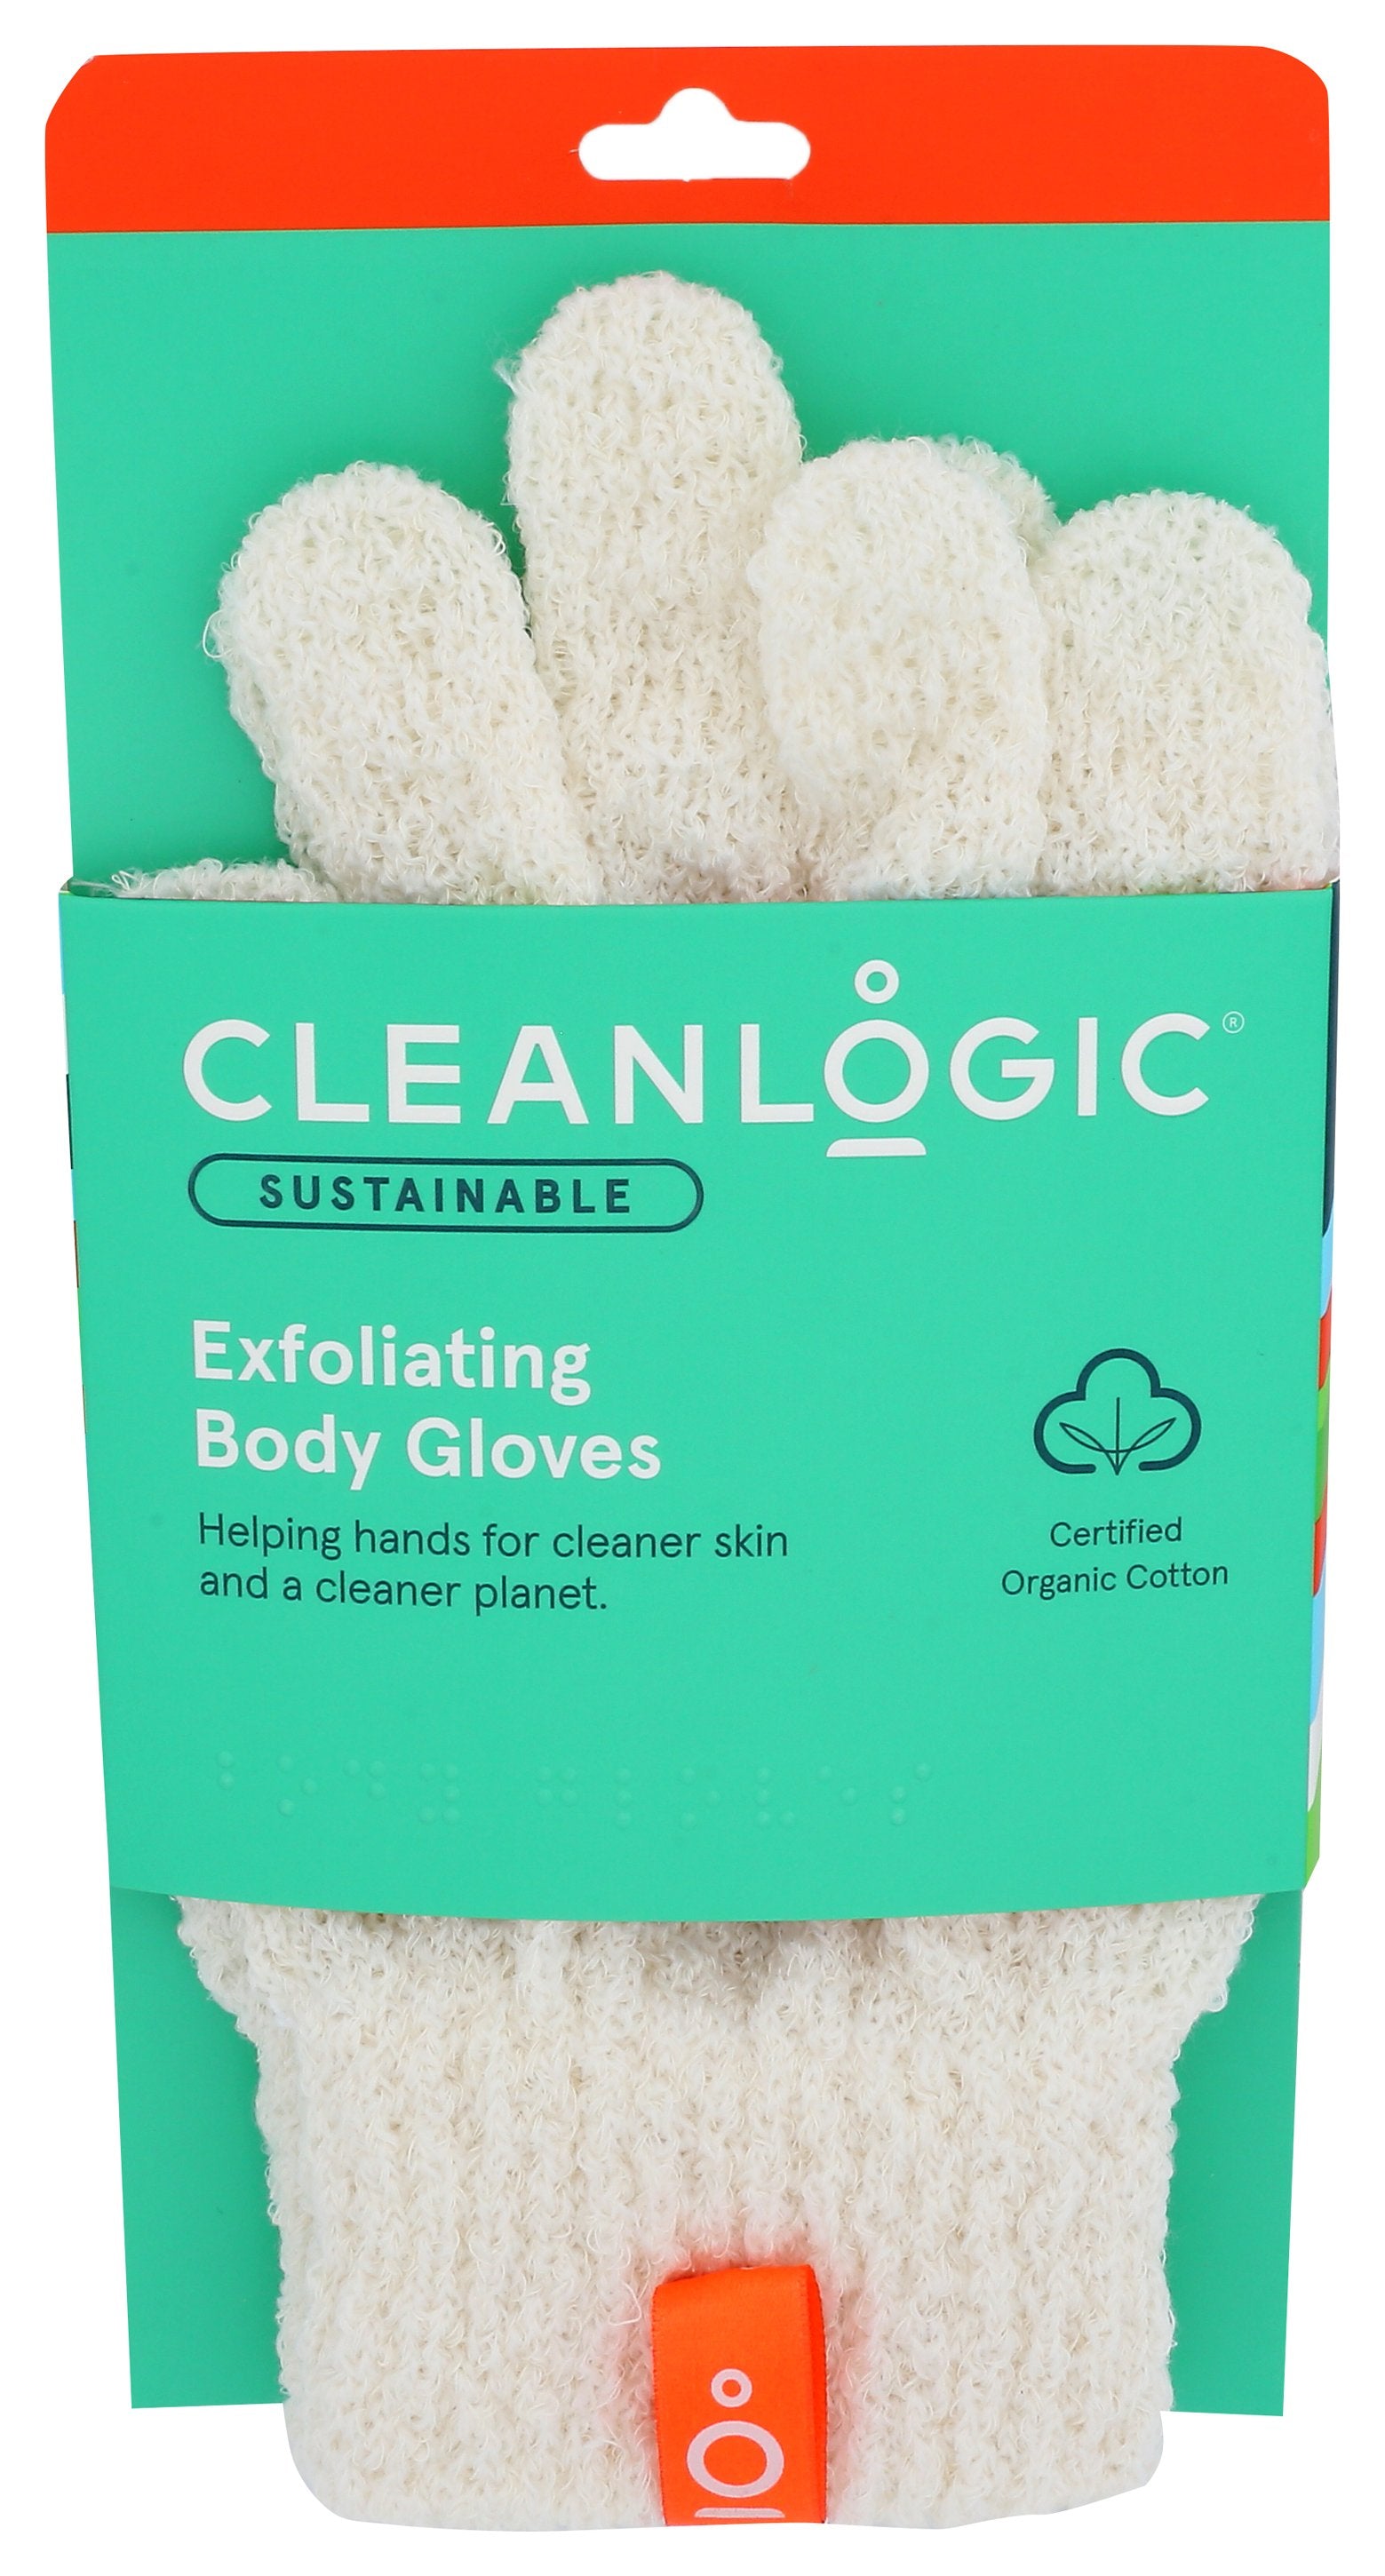 CLEANLOGIC GLOVES BATH SUSTAINABLE - Case of 6